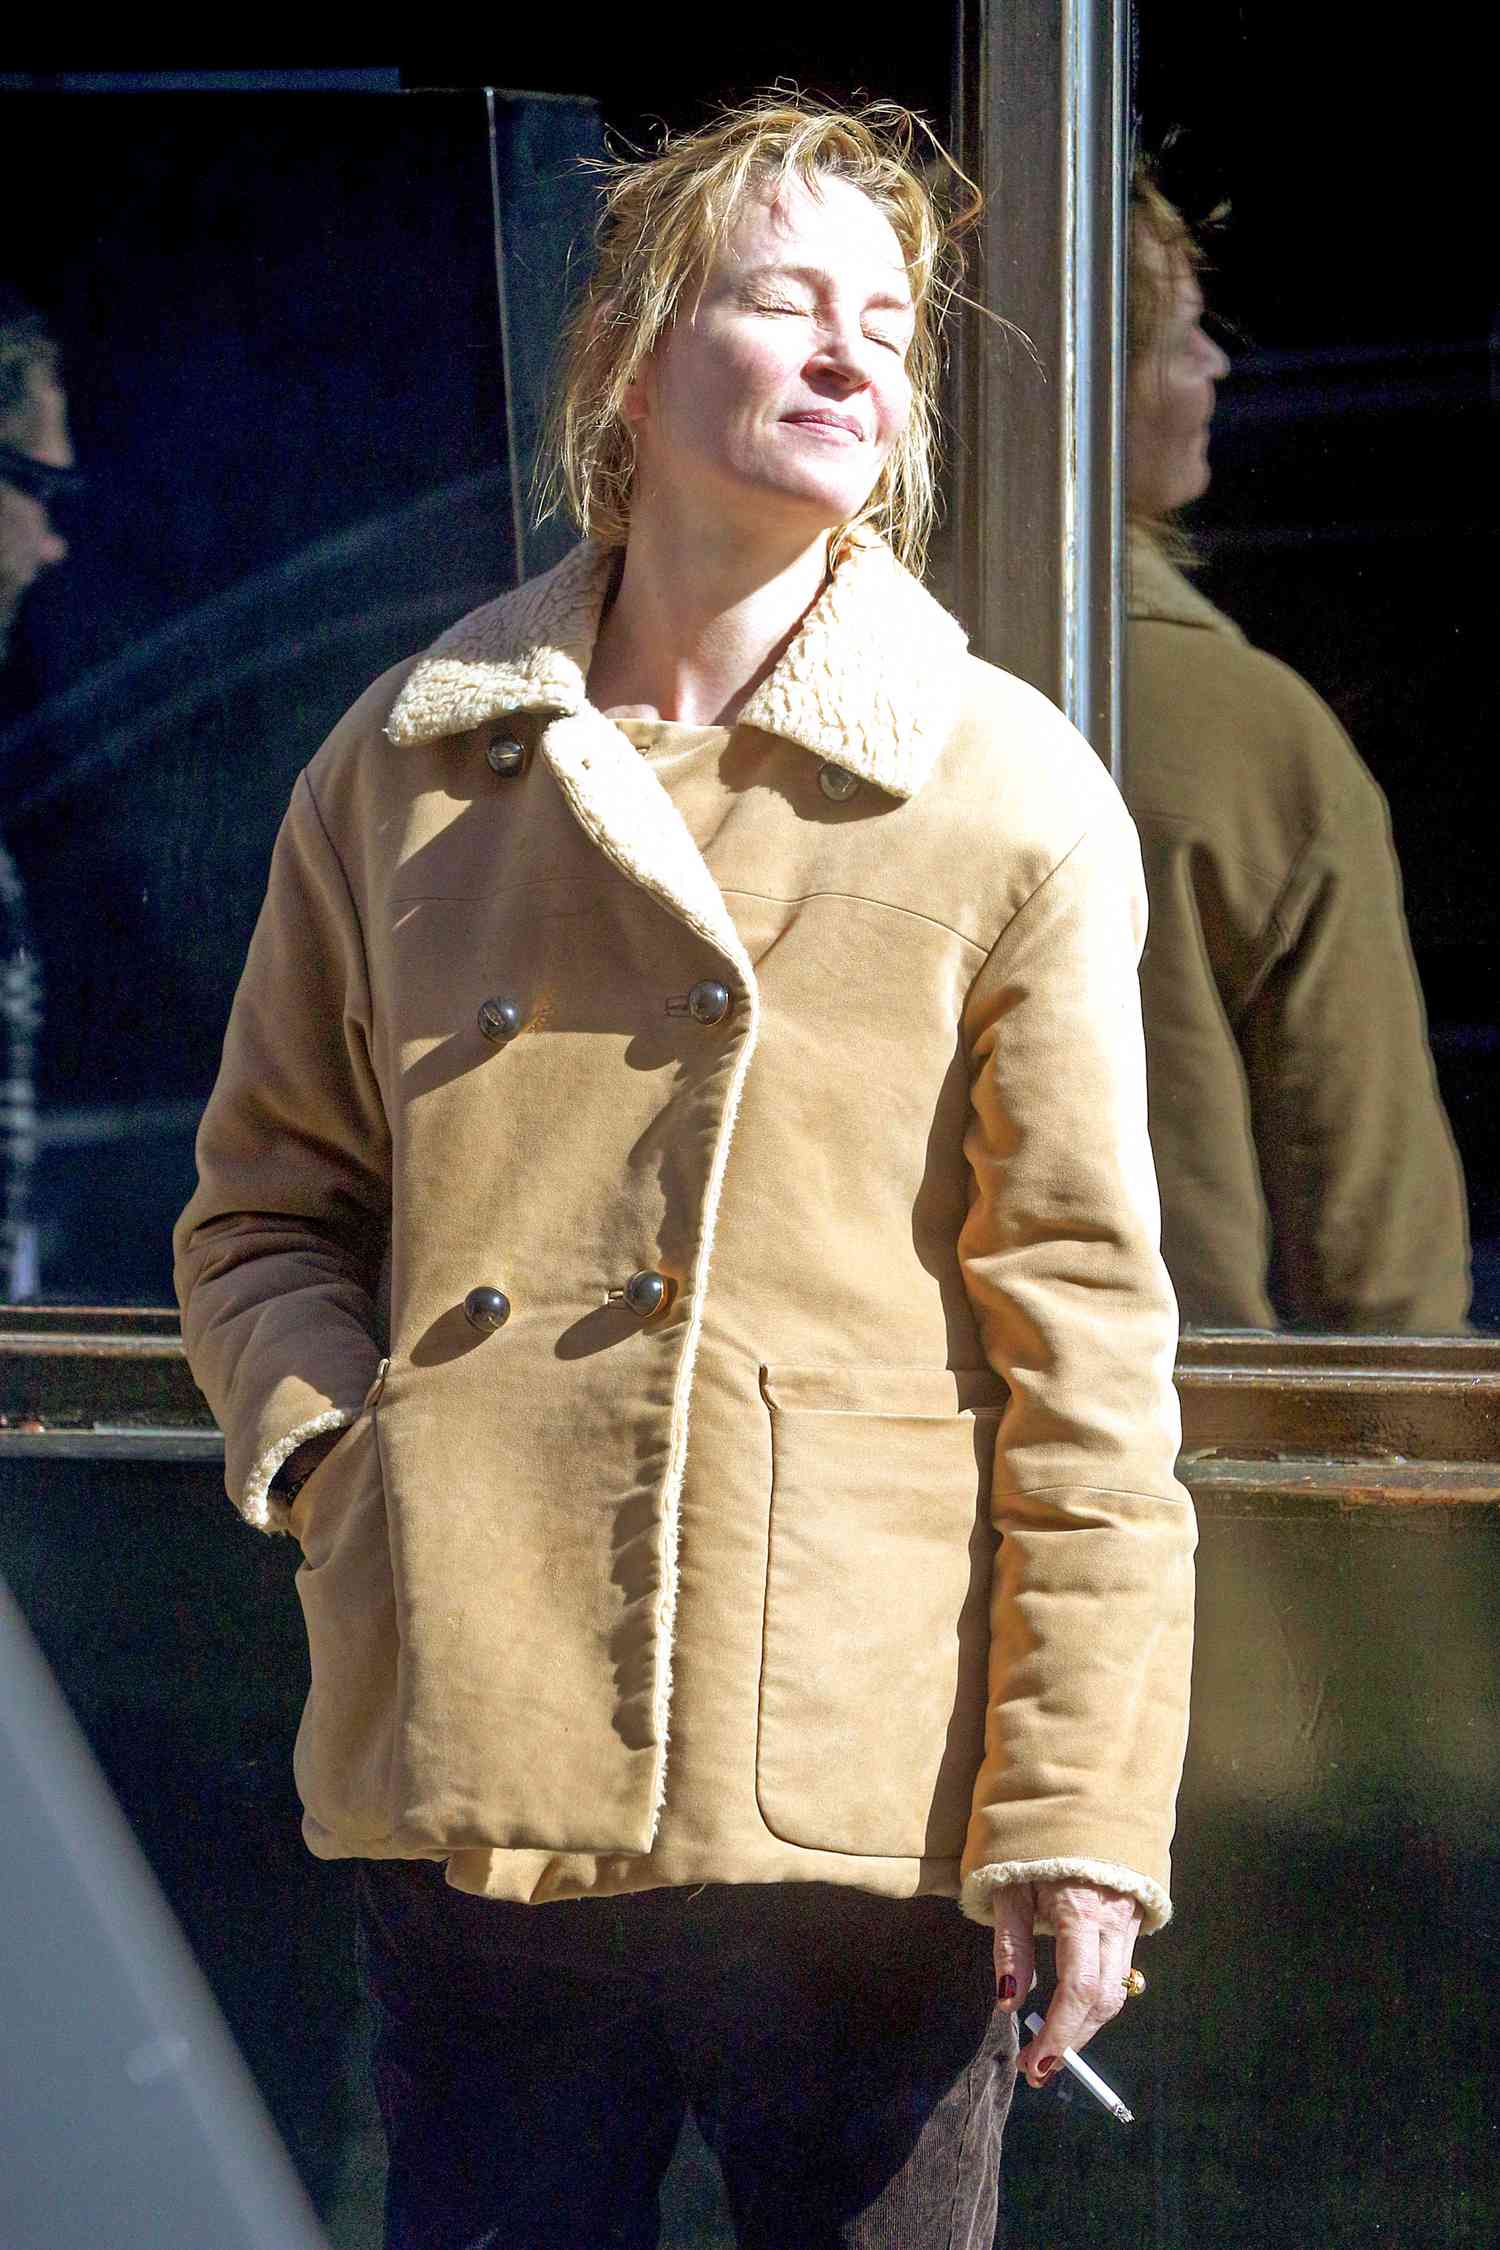 EXCLUSIVE Barefaced Uma Thurman Takes A Minute To Herself While Chain-Smoking